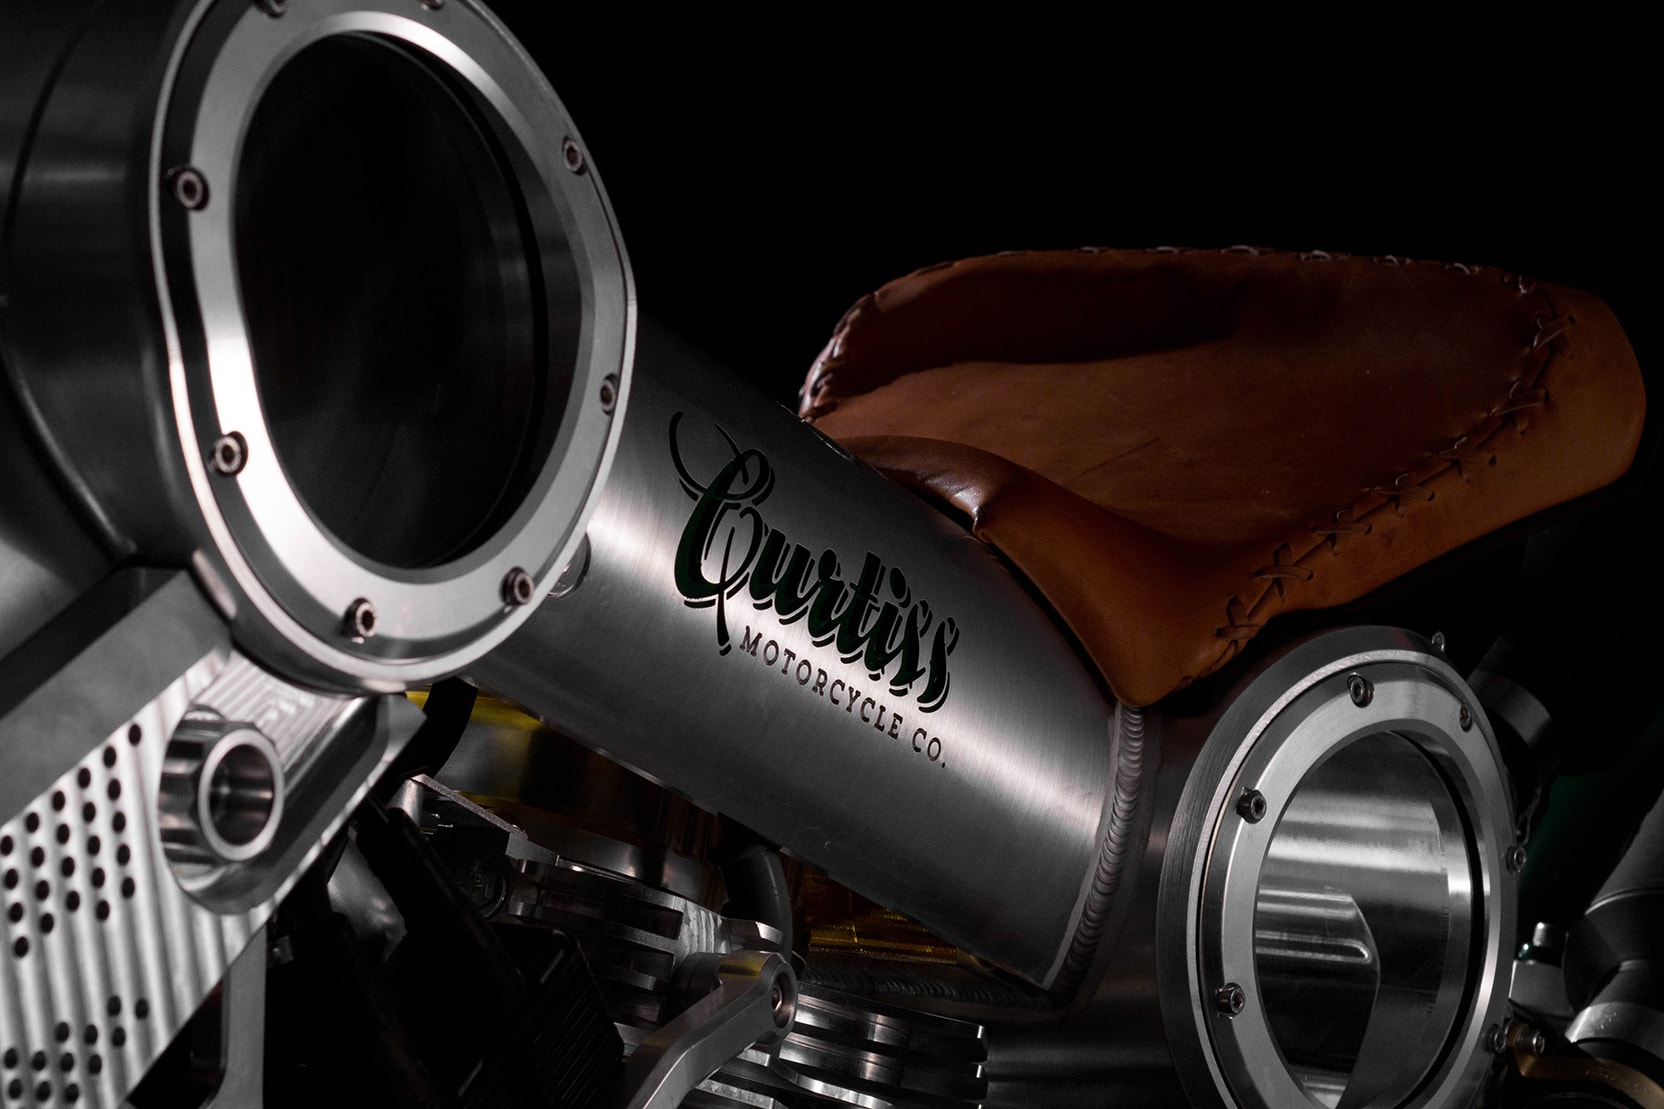 Curtiss Released First Bike 100 Years Warhawk Motorcycle Aluminum Frame 2200cc V-Twin 165 MPH Girder Forks